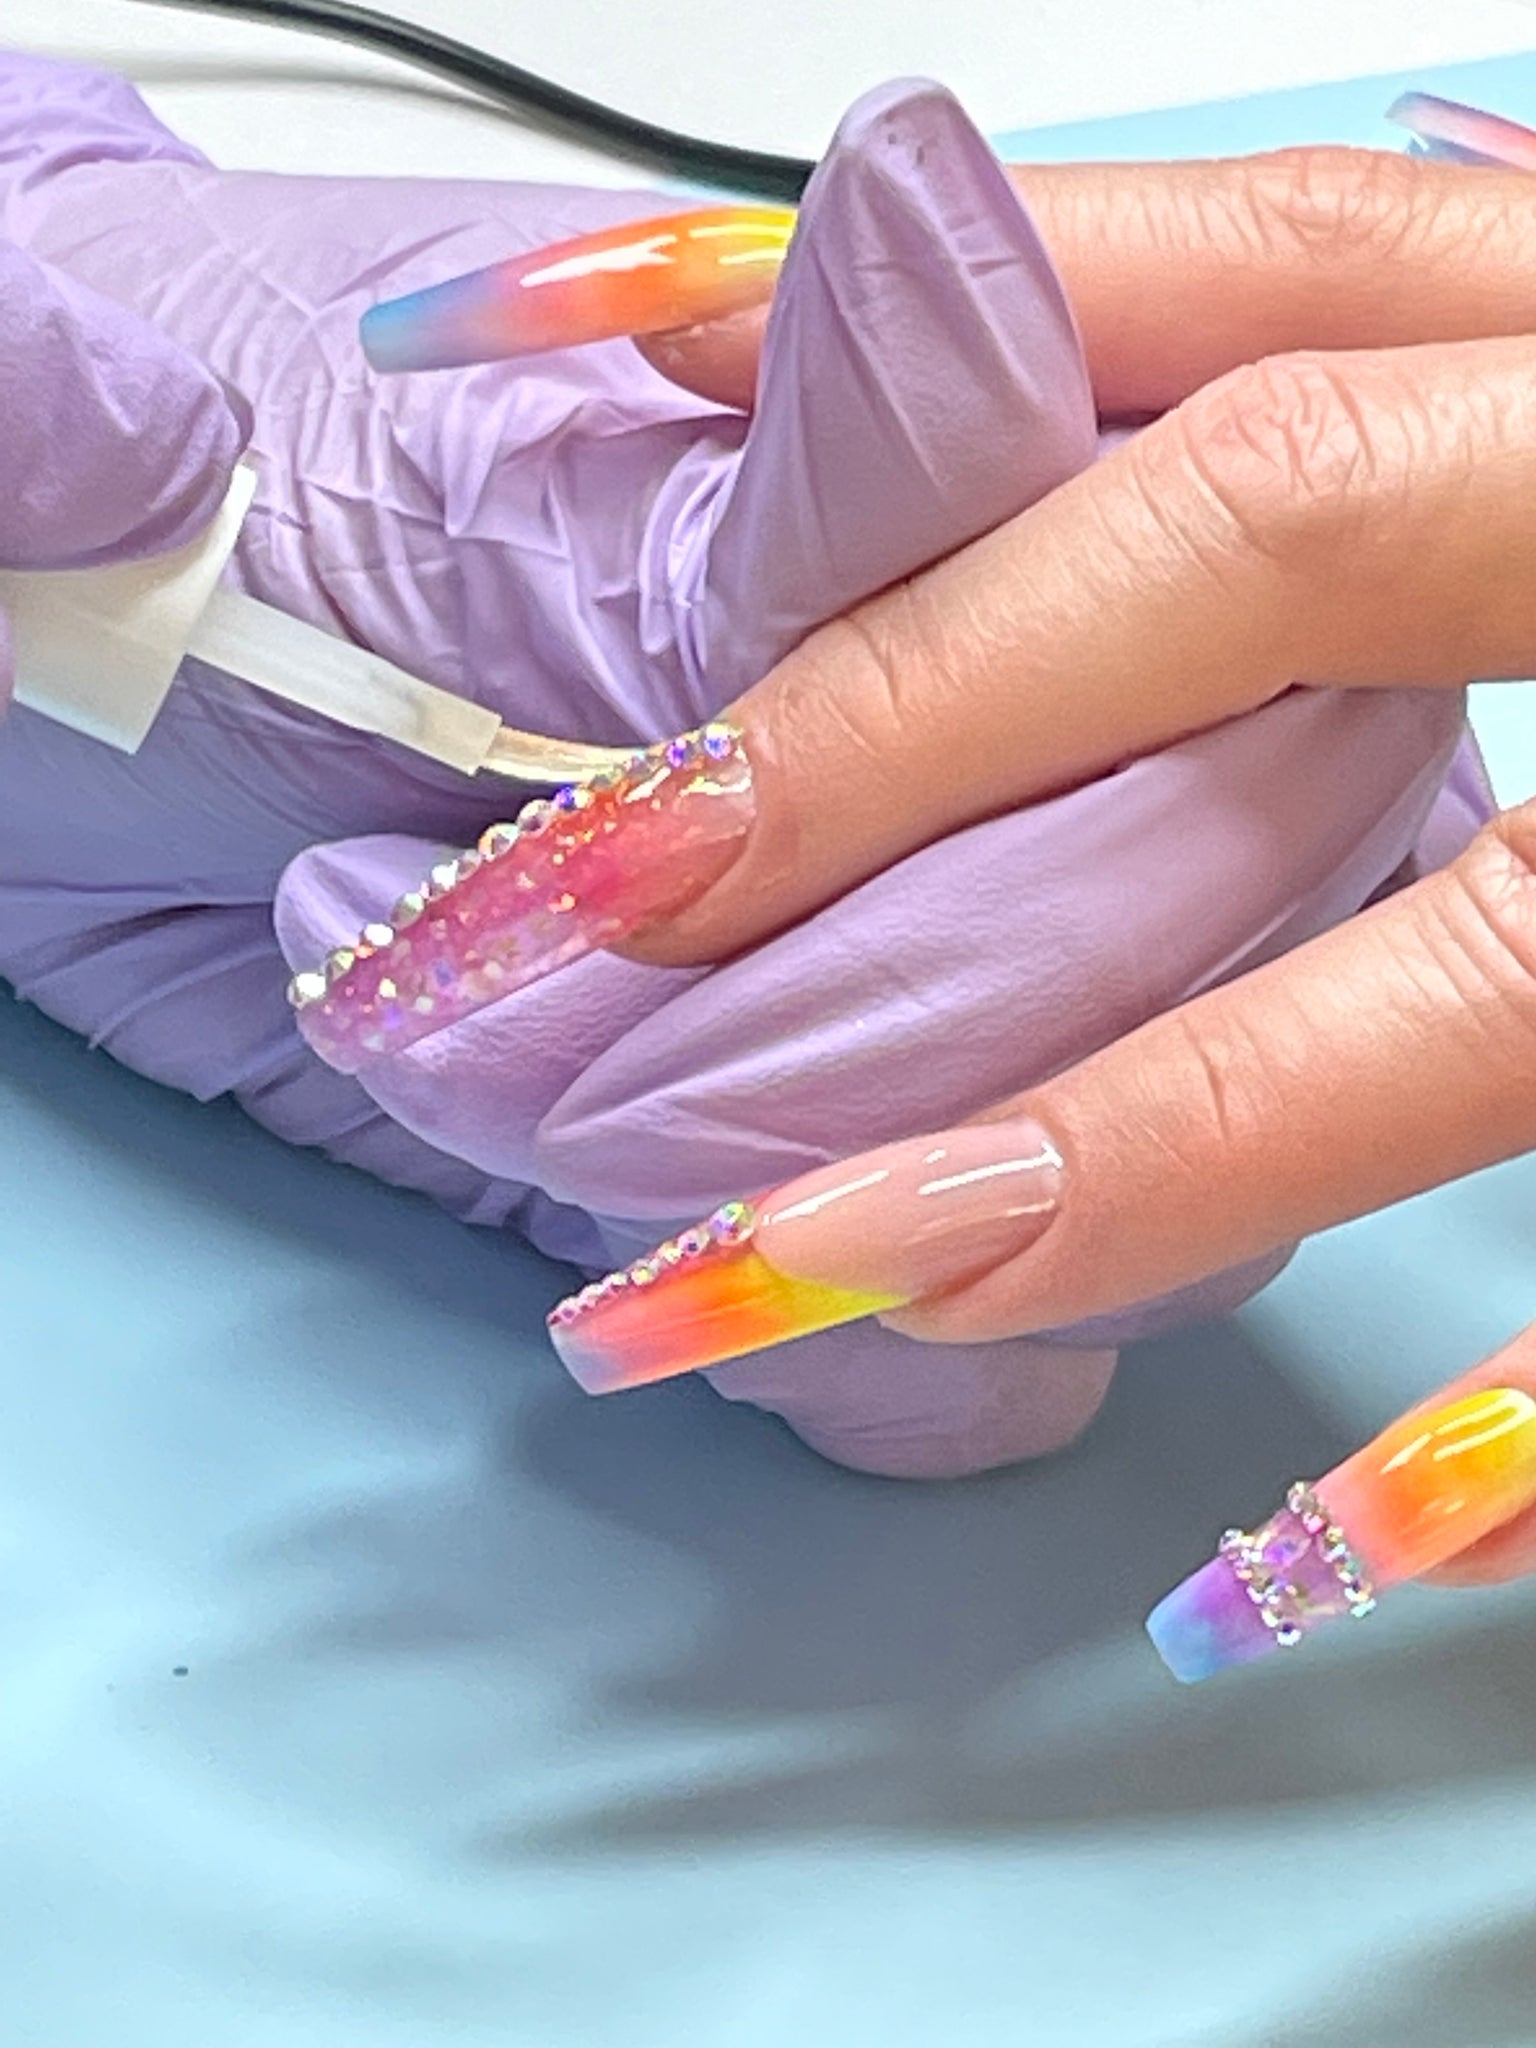 Sculpted Acrylic Nails - Picture of No. 10, Hatherleigh - Tripadvisor